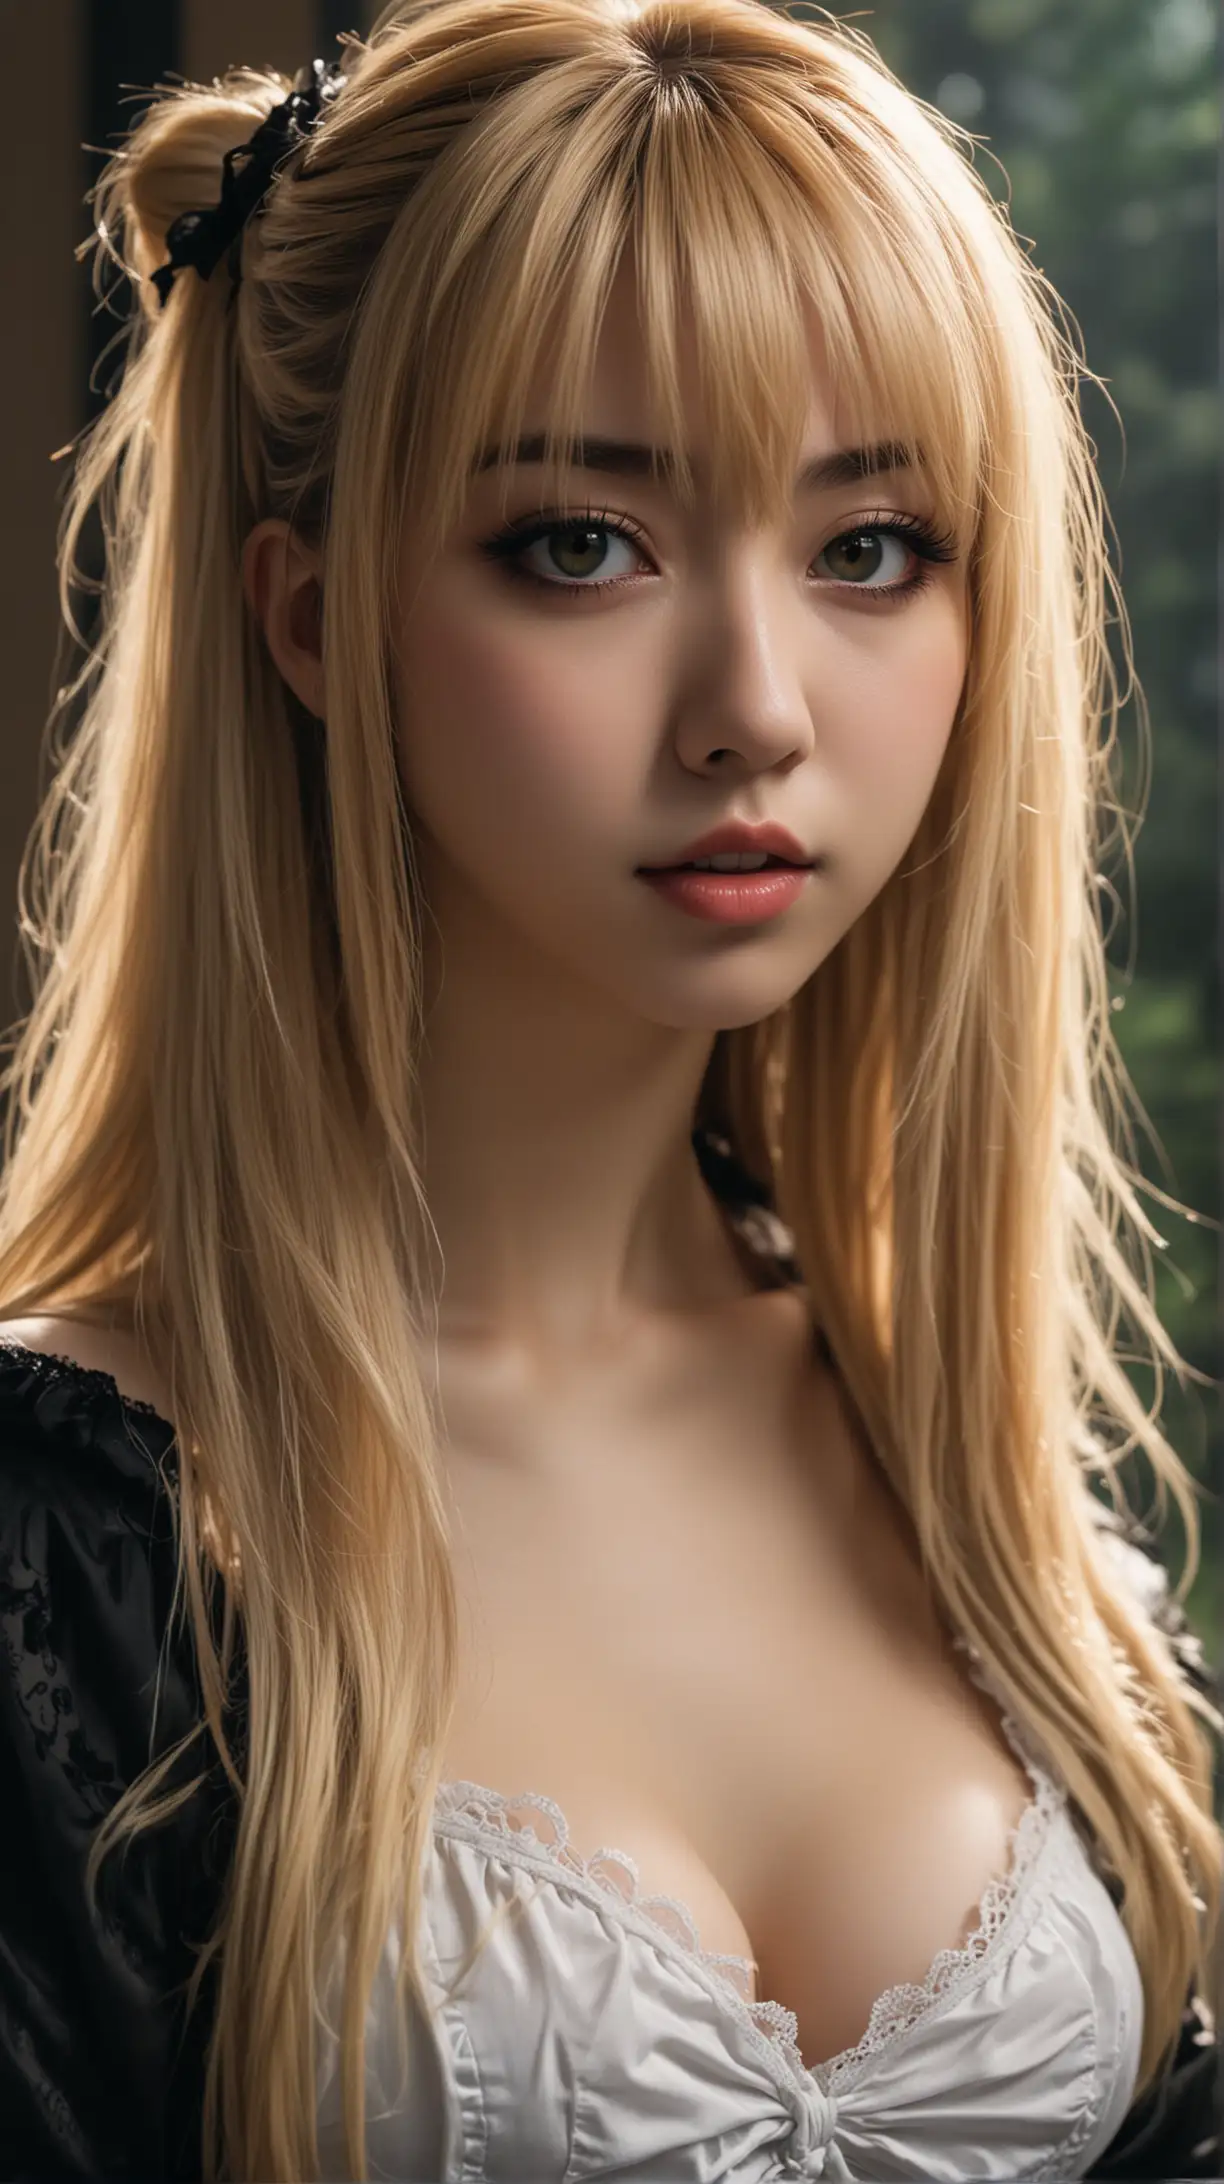 In the middle of the picture is Misa Amane, with big breasts, who is depicted in her typical gothic sexy kawaii outfit, full body photo. Her long blonde hair falls in loose waves down her back, framing her delicate features and intense gaze. The background is bathed in soft, muted shades, and the shadows dancing in the dimly lit scene further enhance the mysterious and seductive atmosphere. Despite the darkness surrounding her, Misa exudes confidence and charm, embodying the complex and mysterious nature of her character. Misa Amane from Death Note, Misa Misa, Misa Amane, Death Note, blonde hair, anime, green aesthetic, epic illustration, wallpaper, 4k, anime-like, perfect face / Misa is surrounded by a mystical and fascinating atmosphere that captivates the viewer and guides them into his world. The play of soft lights and shadows highlights Misa's every movement and expression while adding a mystical charm to the scene. The muted shades in the background put Misa in the center of the image and emphasize the strong features and uniqueness of her character. Natural lighting, Soft diffused lighting. Photo taken by Naoki Urasawa with Sony A7 III and a 50mm lens. Award Winning Photography style, Anime Portrait Photography, 4k, Ultra-HD, Super-Resolution. --v 5 --q 2